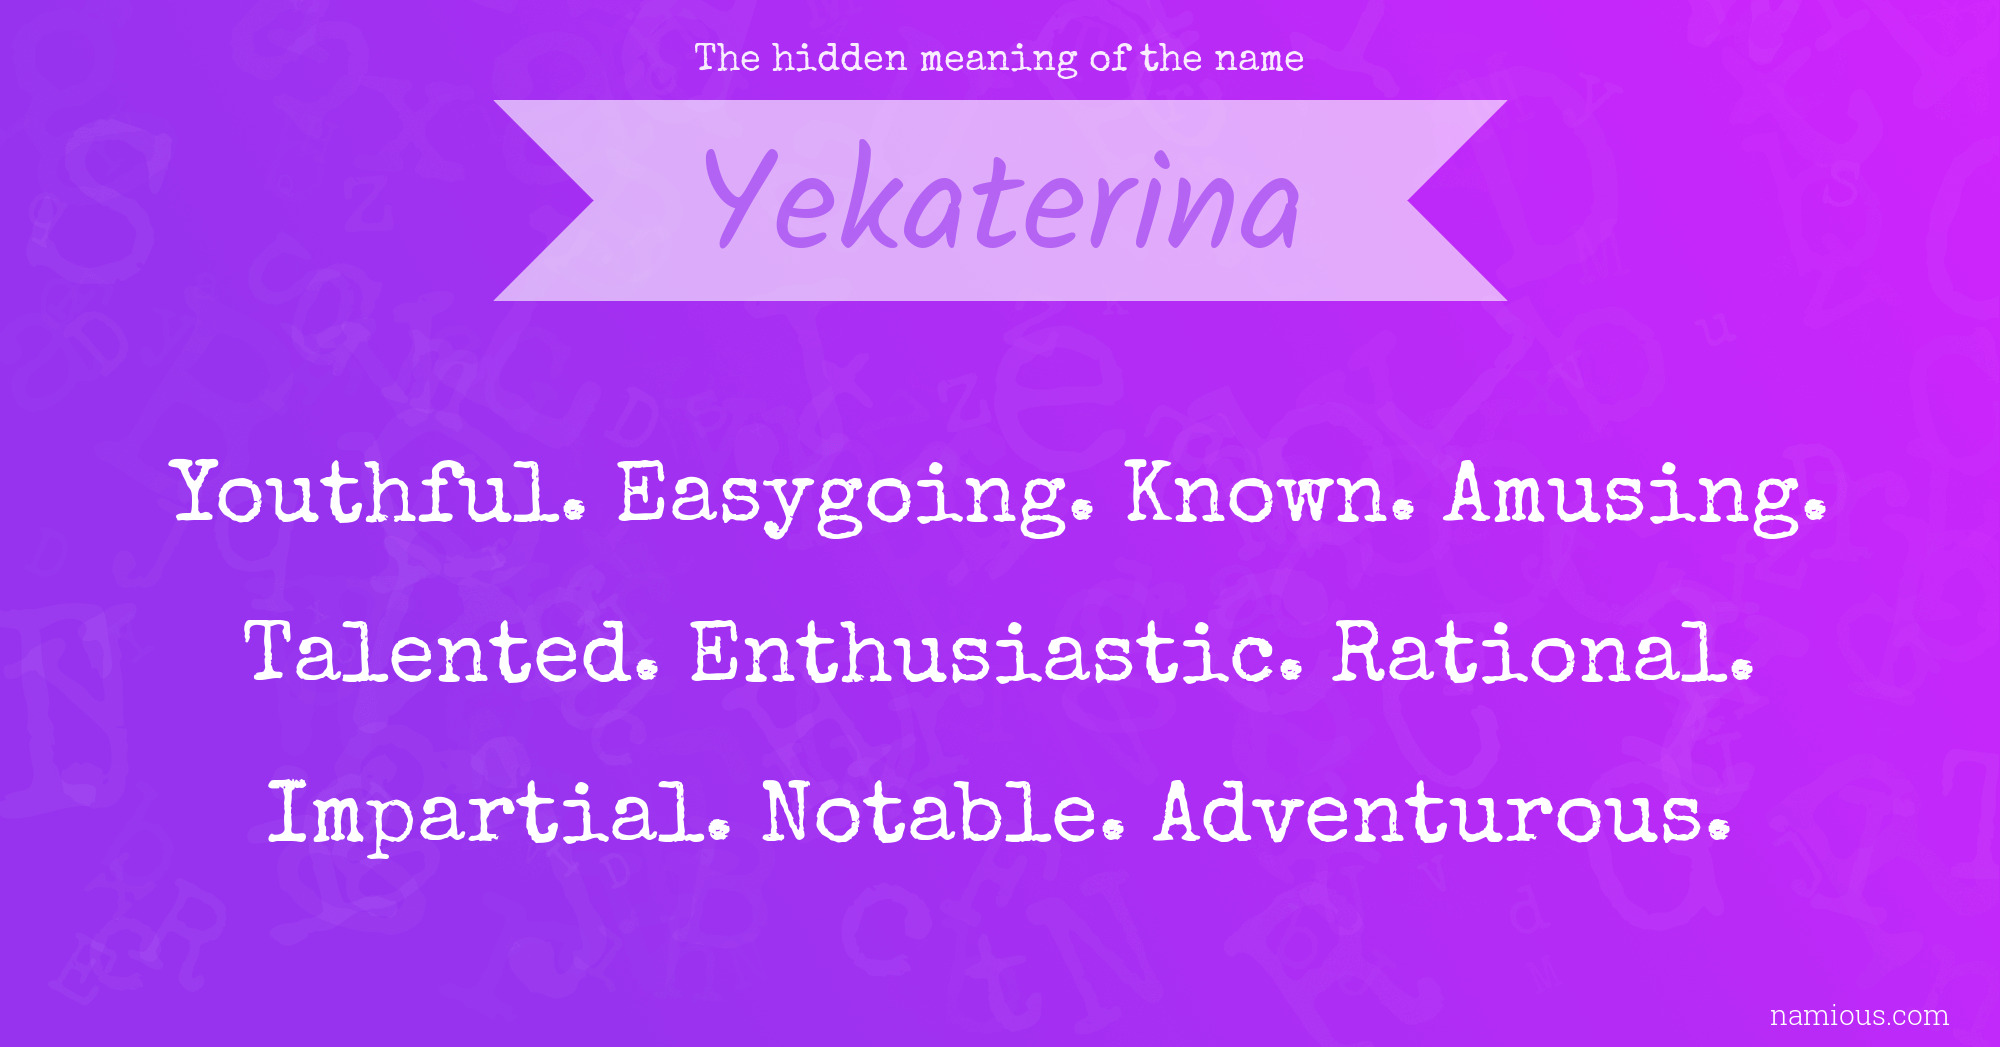 The hidden meaning of the name Yekaterina